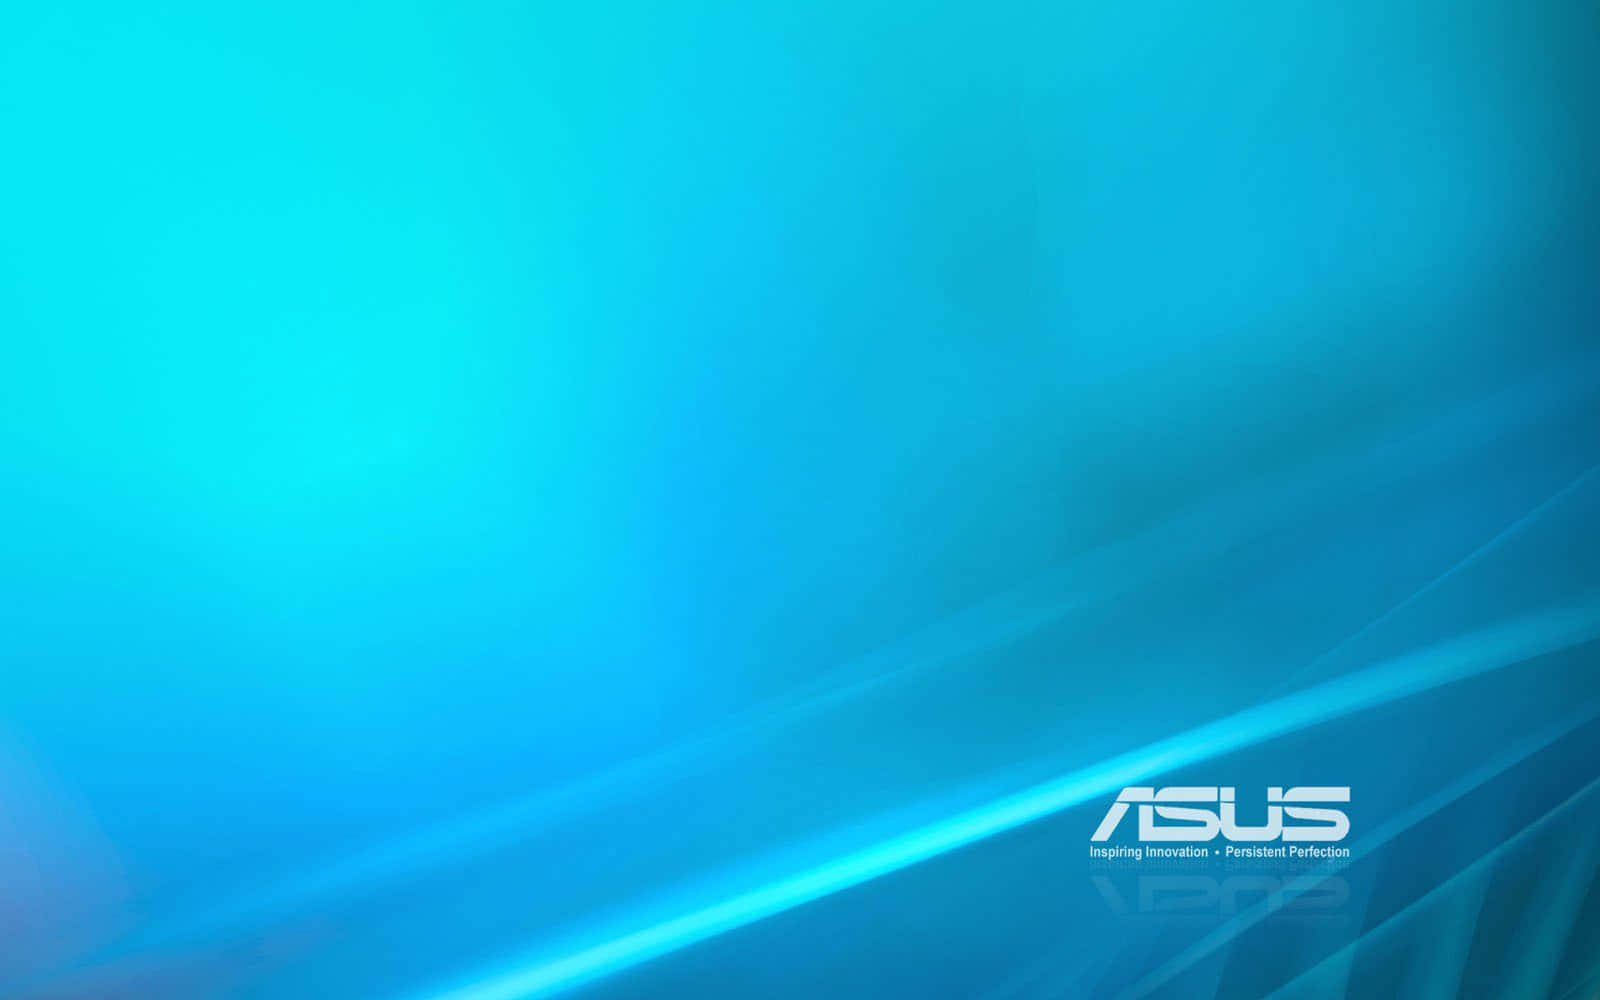 Dive into the breathtaking world of gaming with Asus.